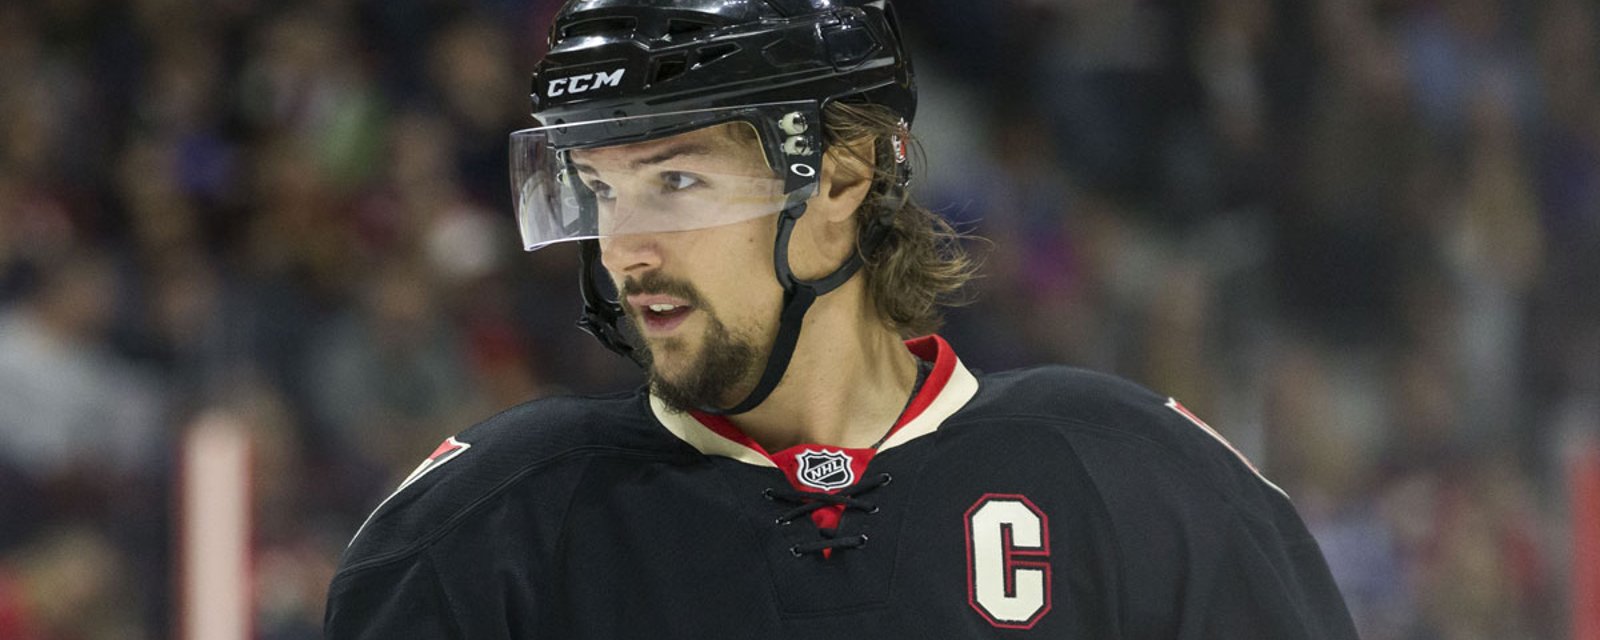 Karlsson may never be the same player again